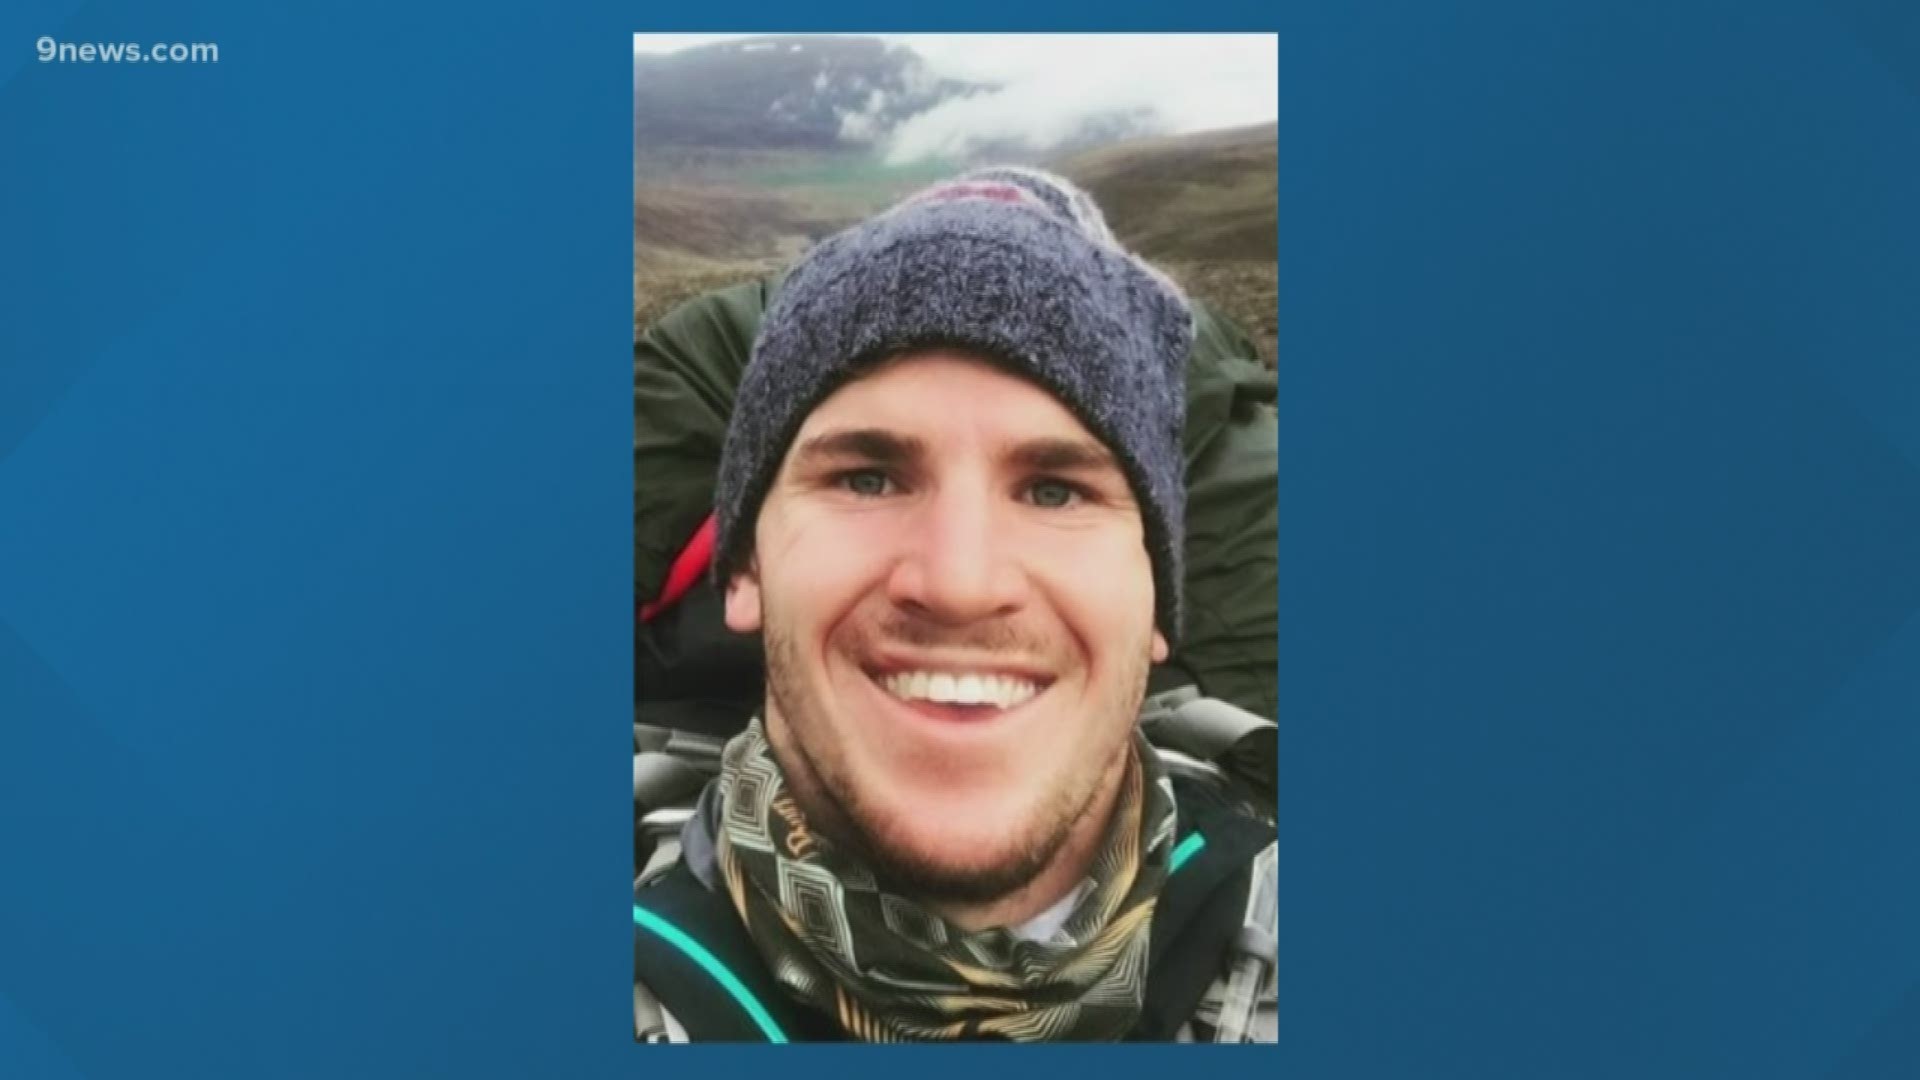 Cole Greenfield's body was found during an extensive search involving multiple agencies.